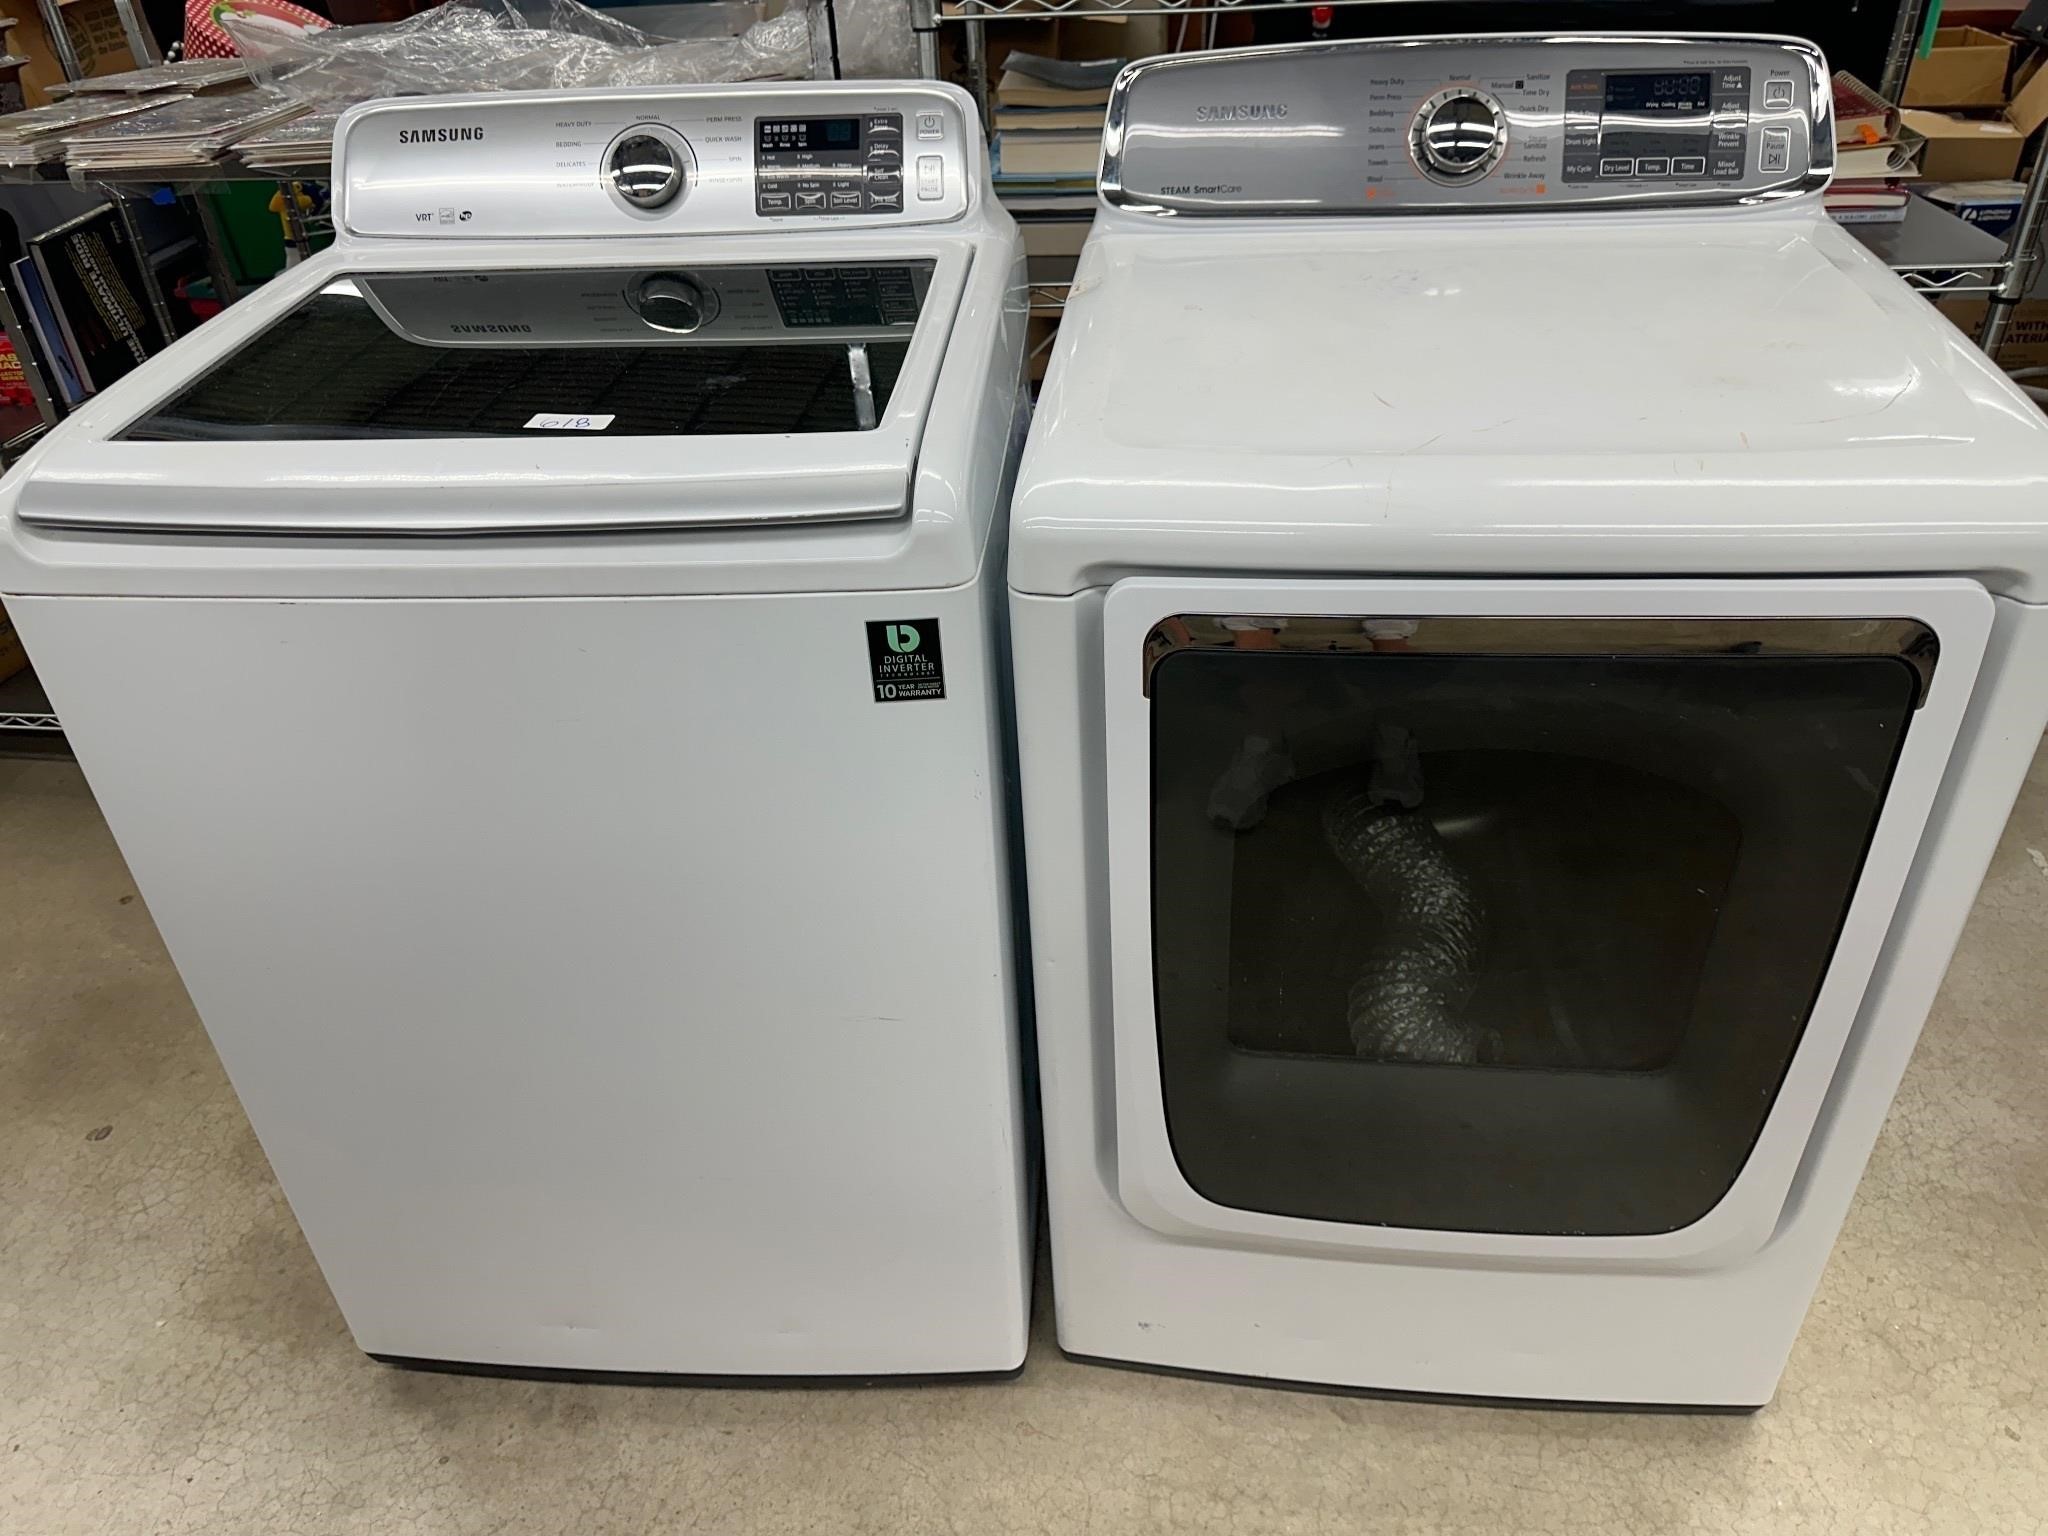 Washer and dryer untested